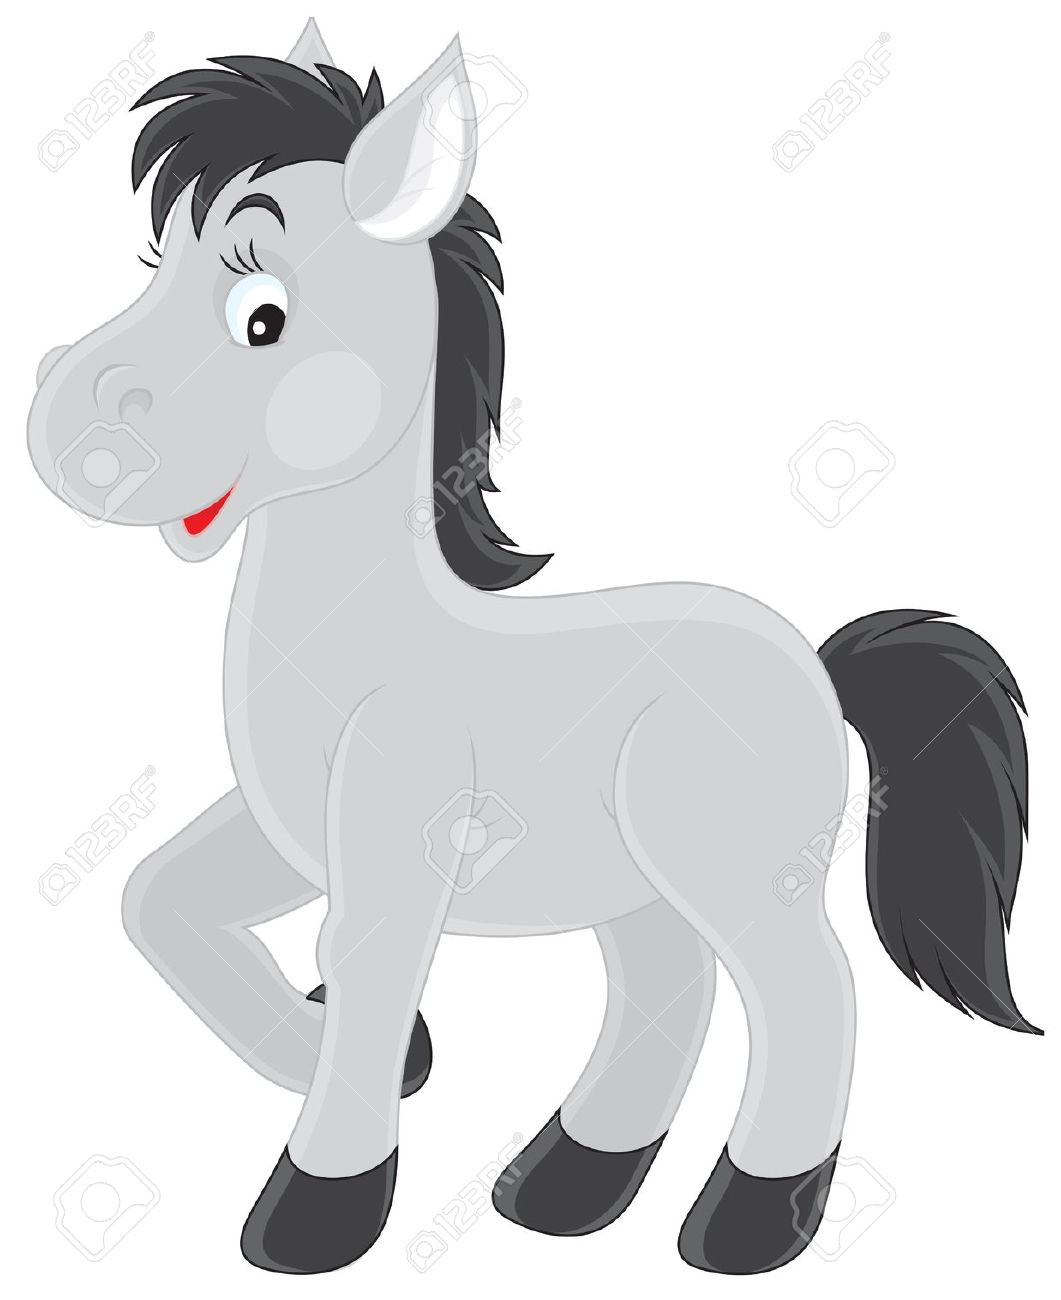 Foal clipart #8, Download drawings